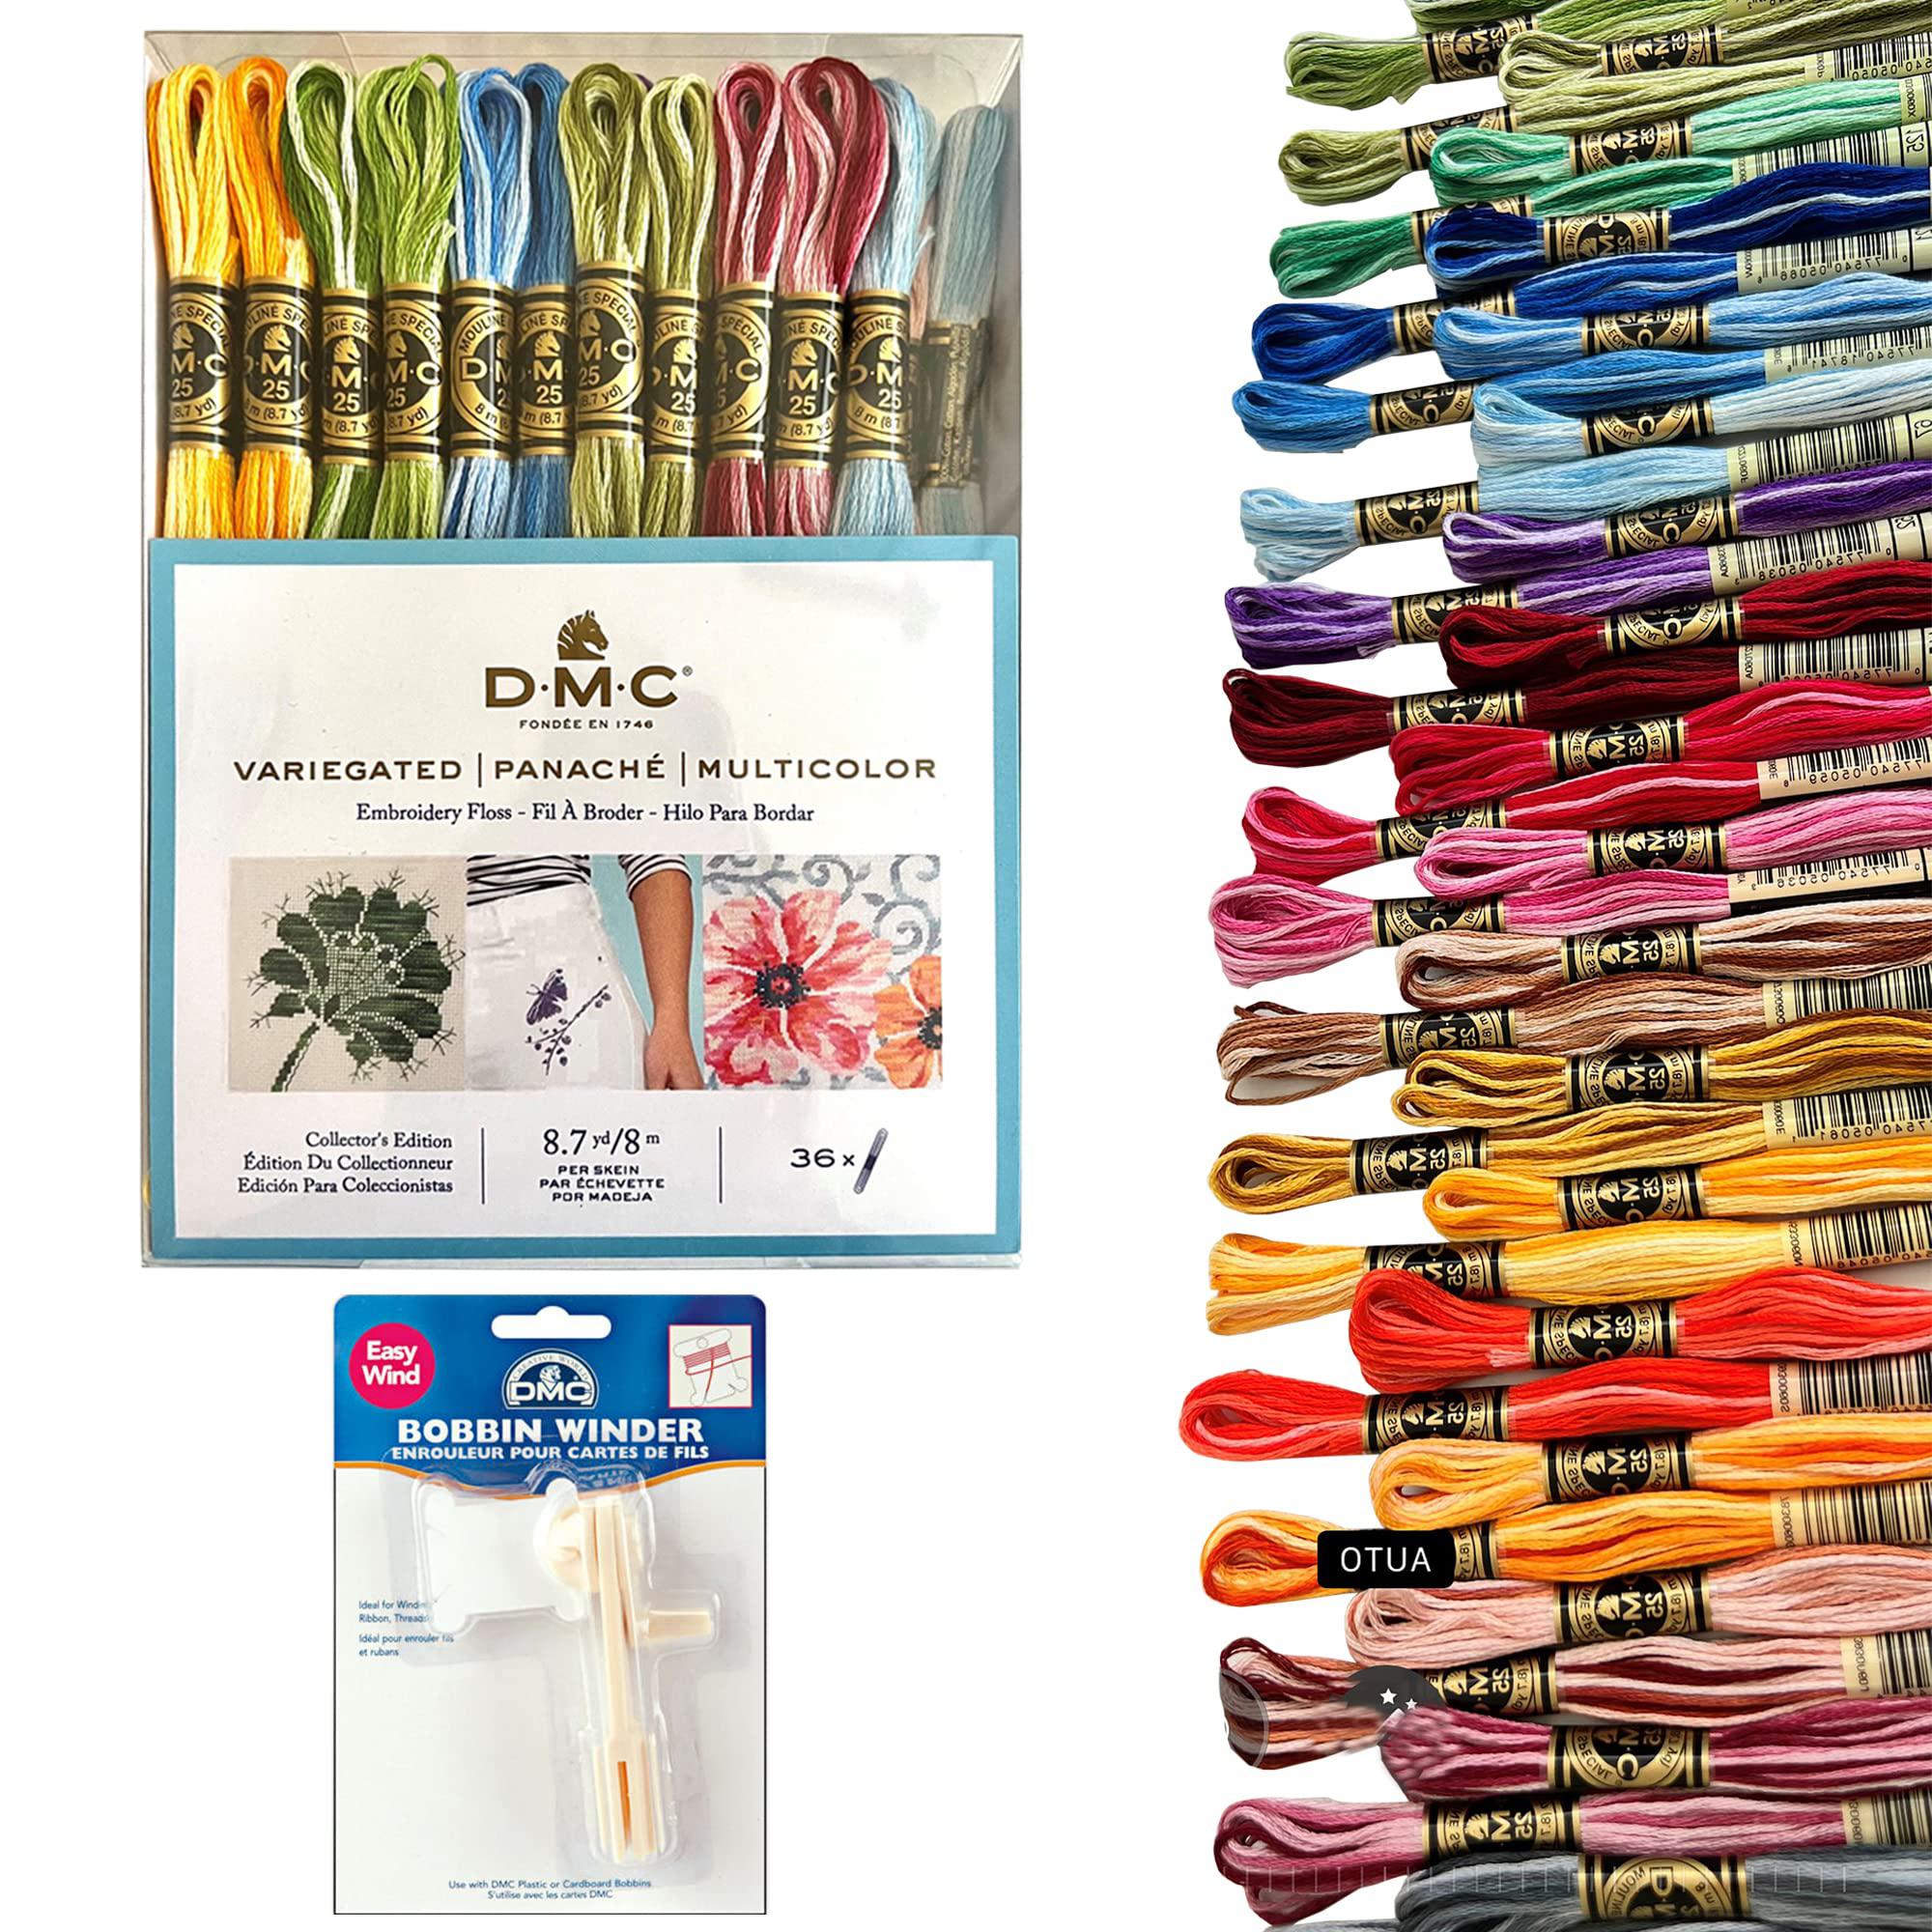 Charming Melodie dmc embroidery floss ,variegated embroidery thread,36 multicolor cross stitch threads bundle with bobbin winder,dmc color var